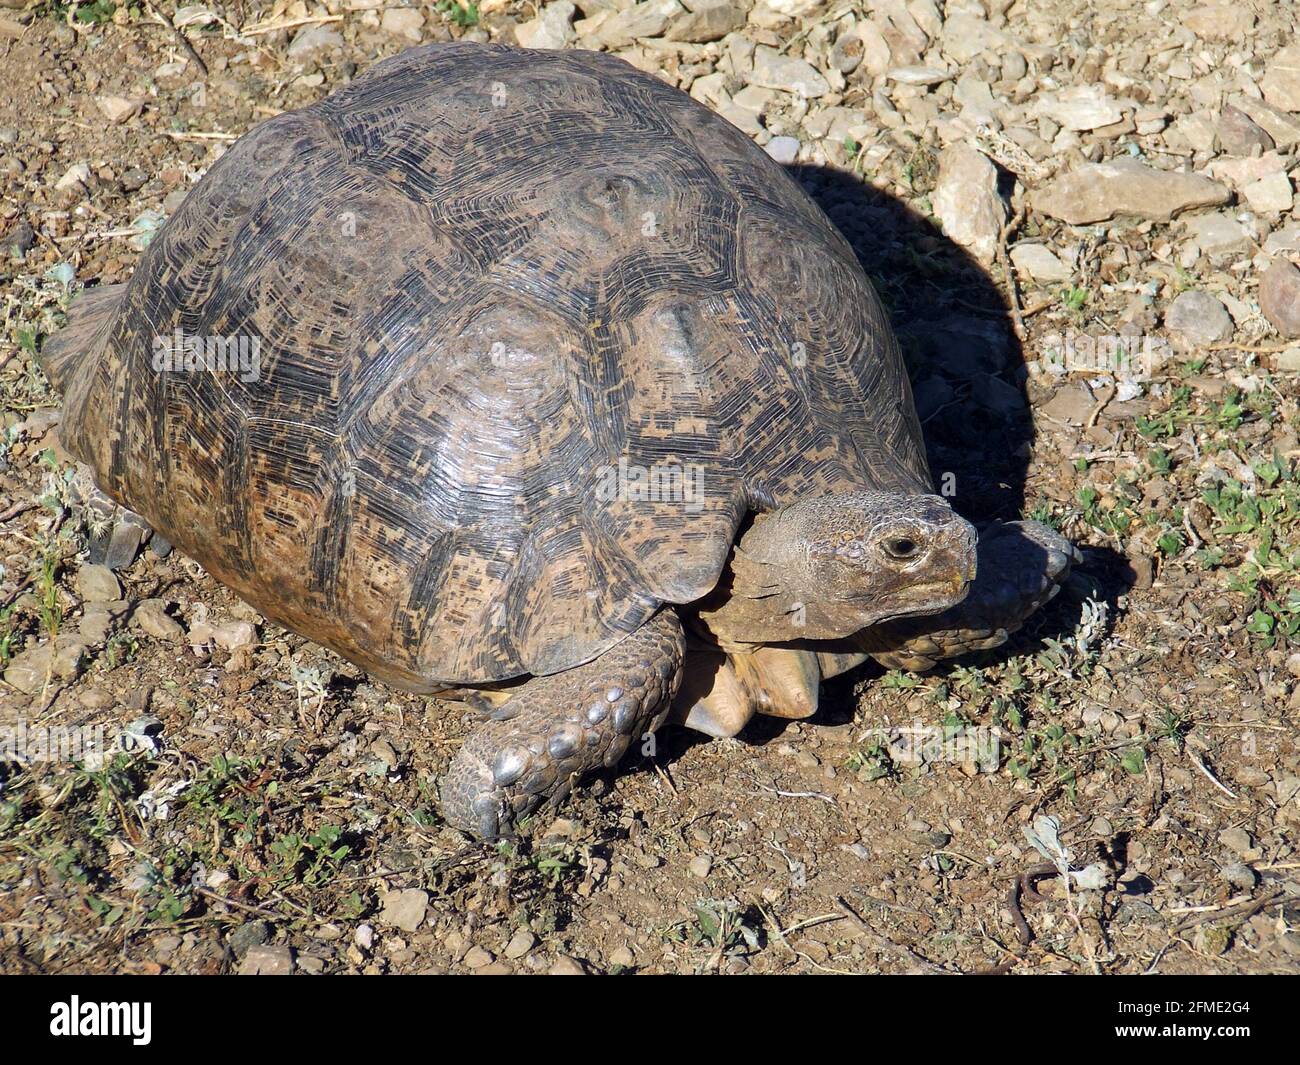 A large adult Leopard Tortoise, Stigmochelys pardalis walking in the wild, Overberg Klein Karoo region of the Western Cape Province, South Africa Stock Photo